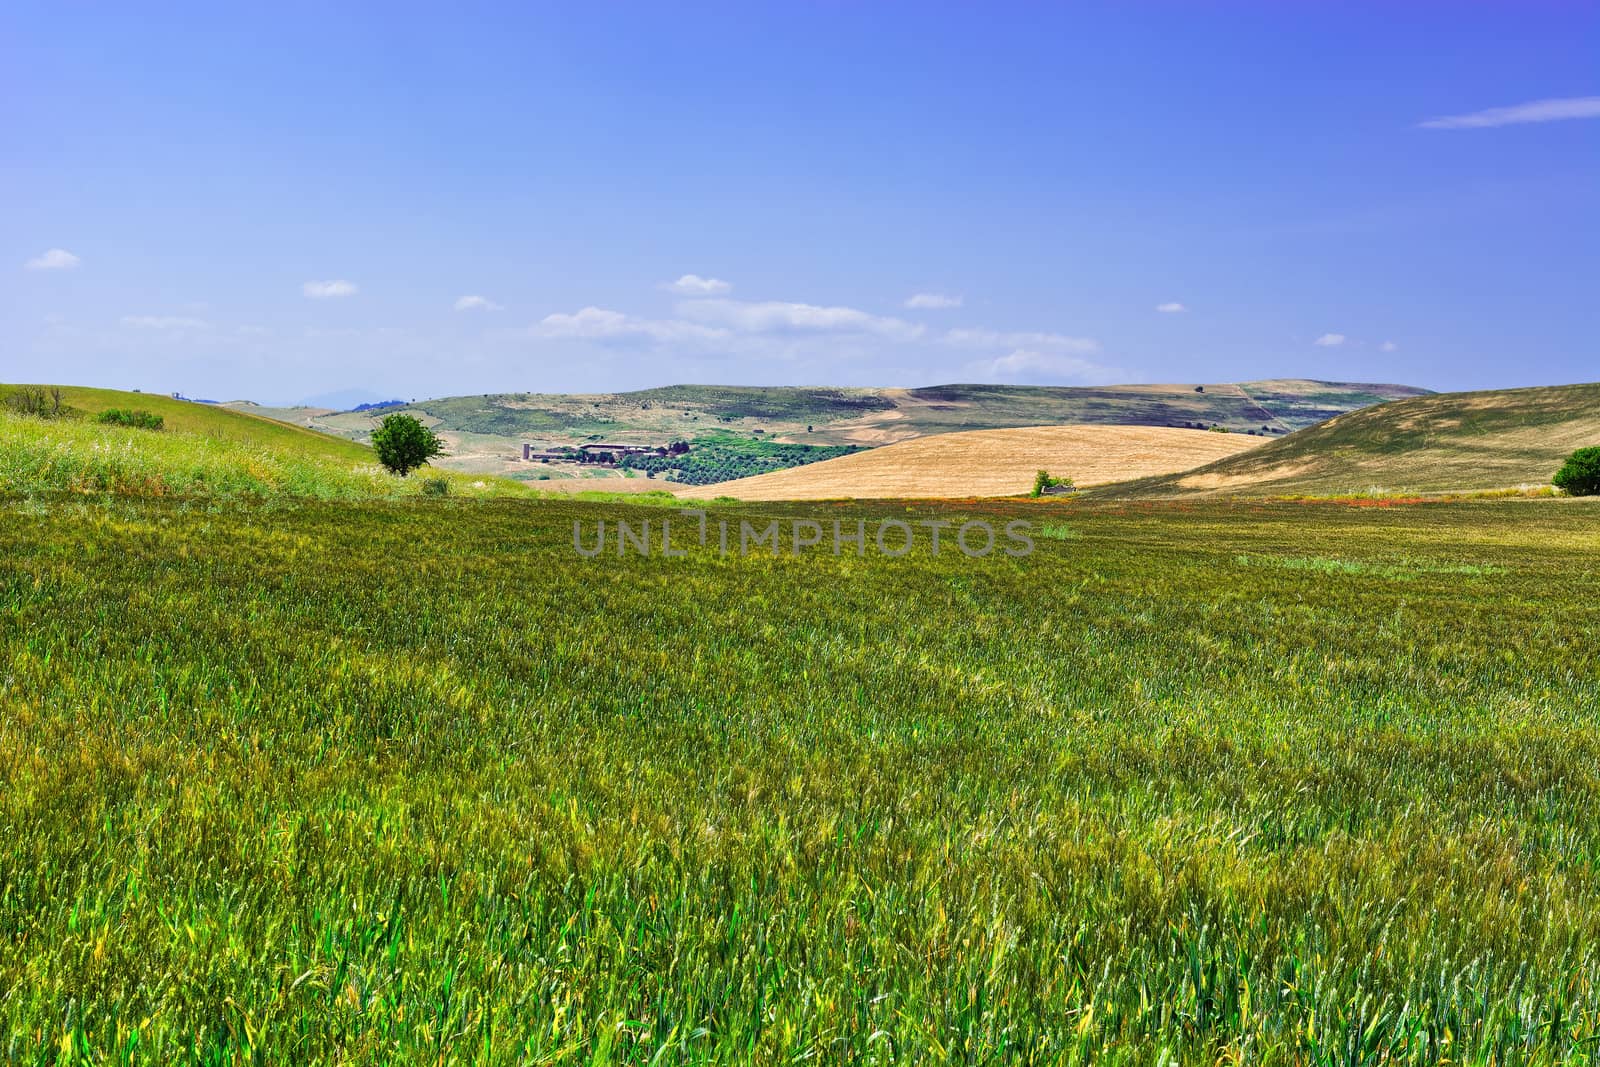 Wheat Fields on the Hills of Sicily